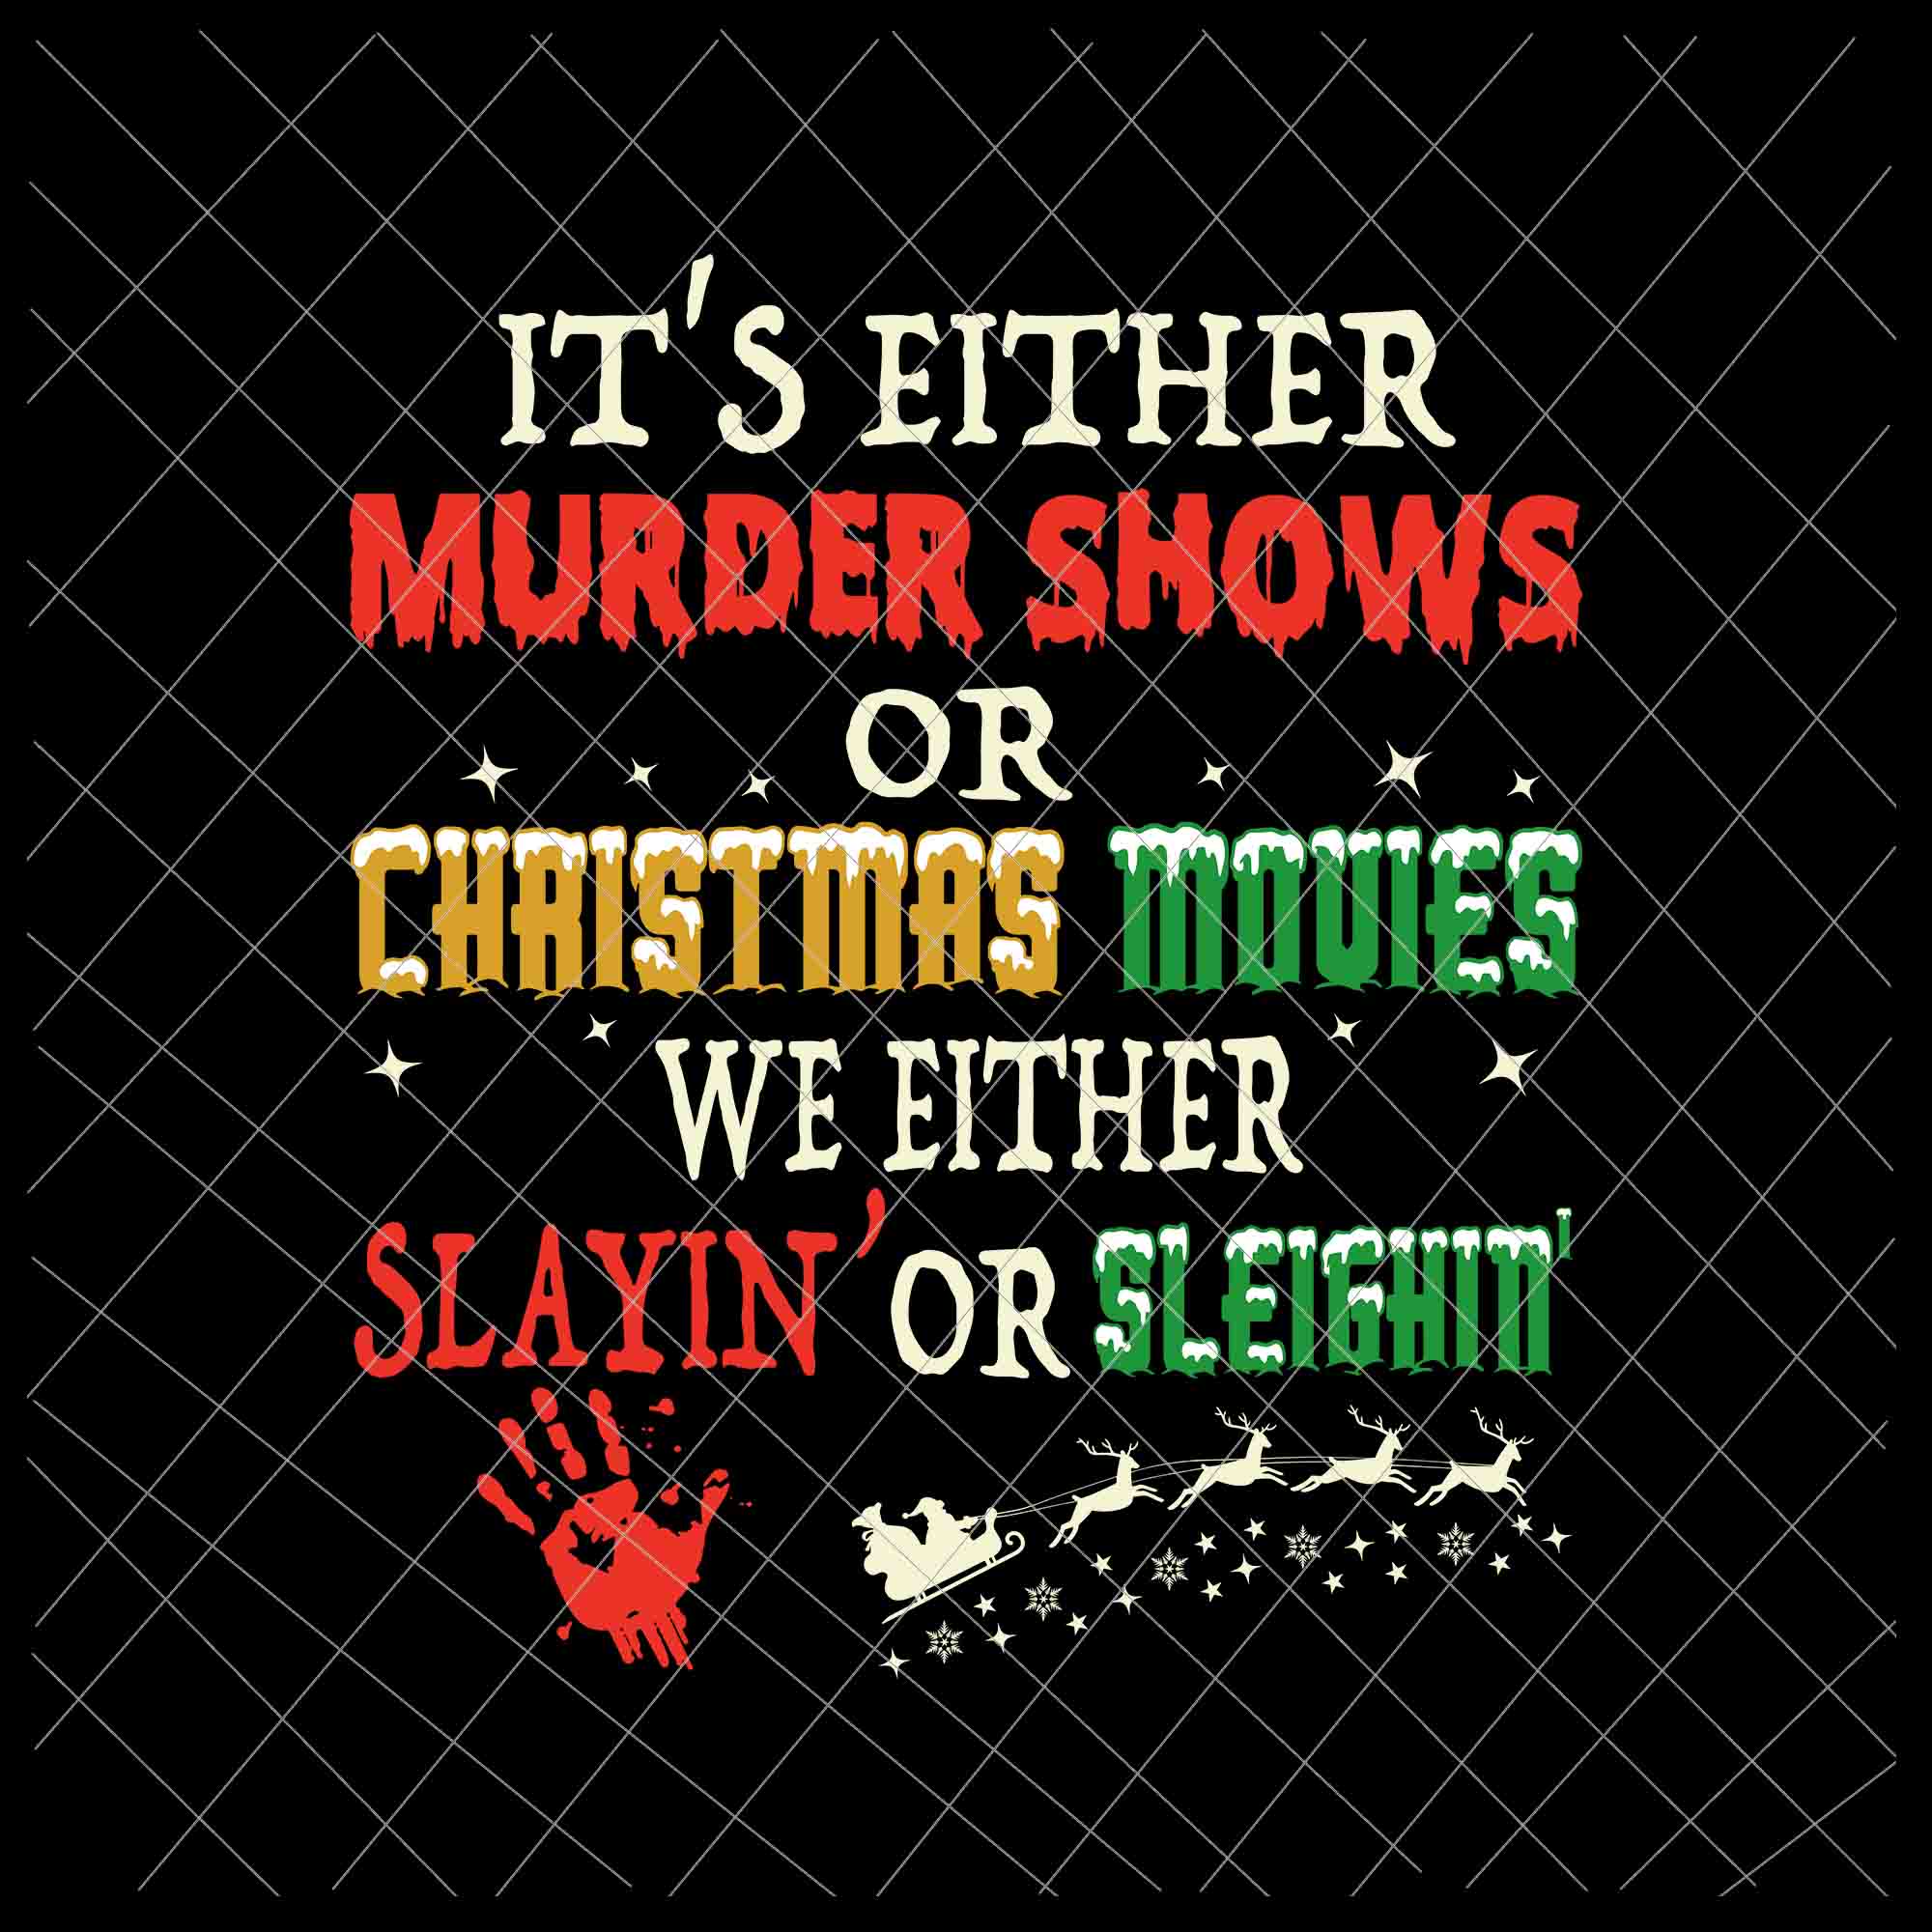 It’s either murder shows or christmas movies svg, we either sleighin' or slayin' svg, christmas movies svg, funny christmas svg